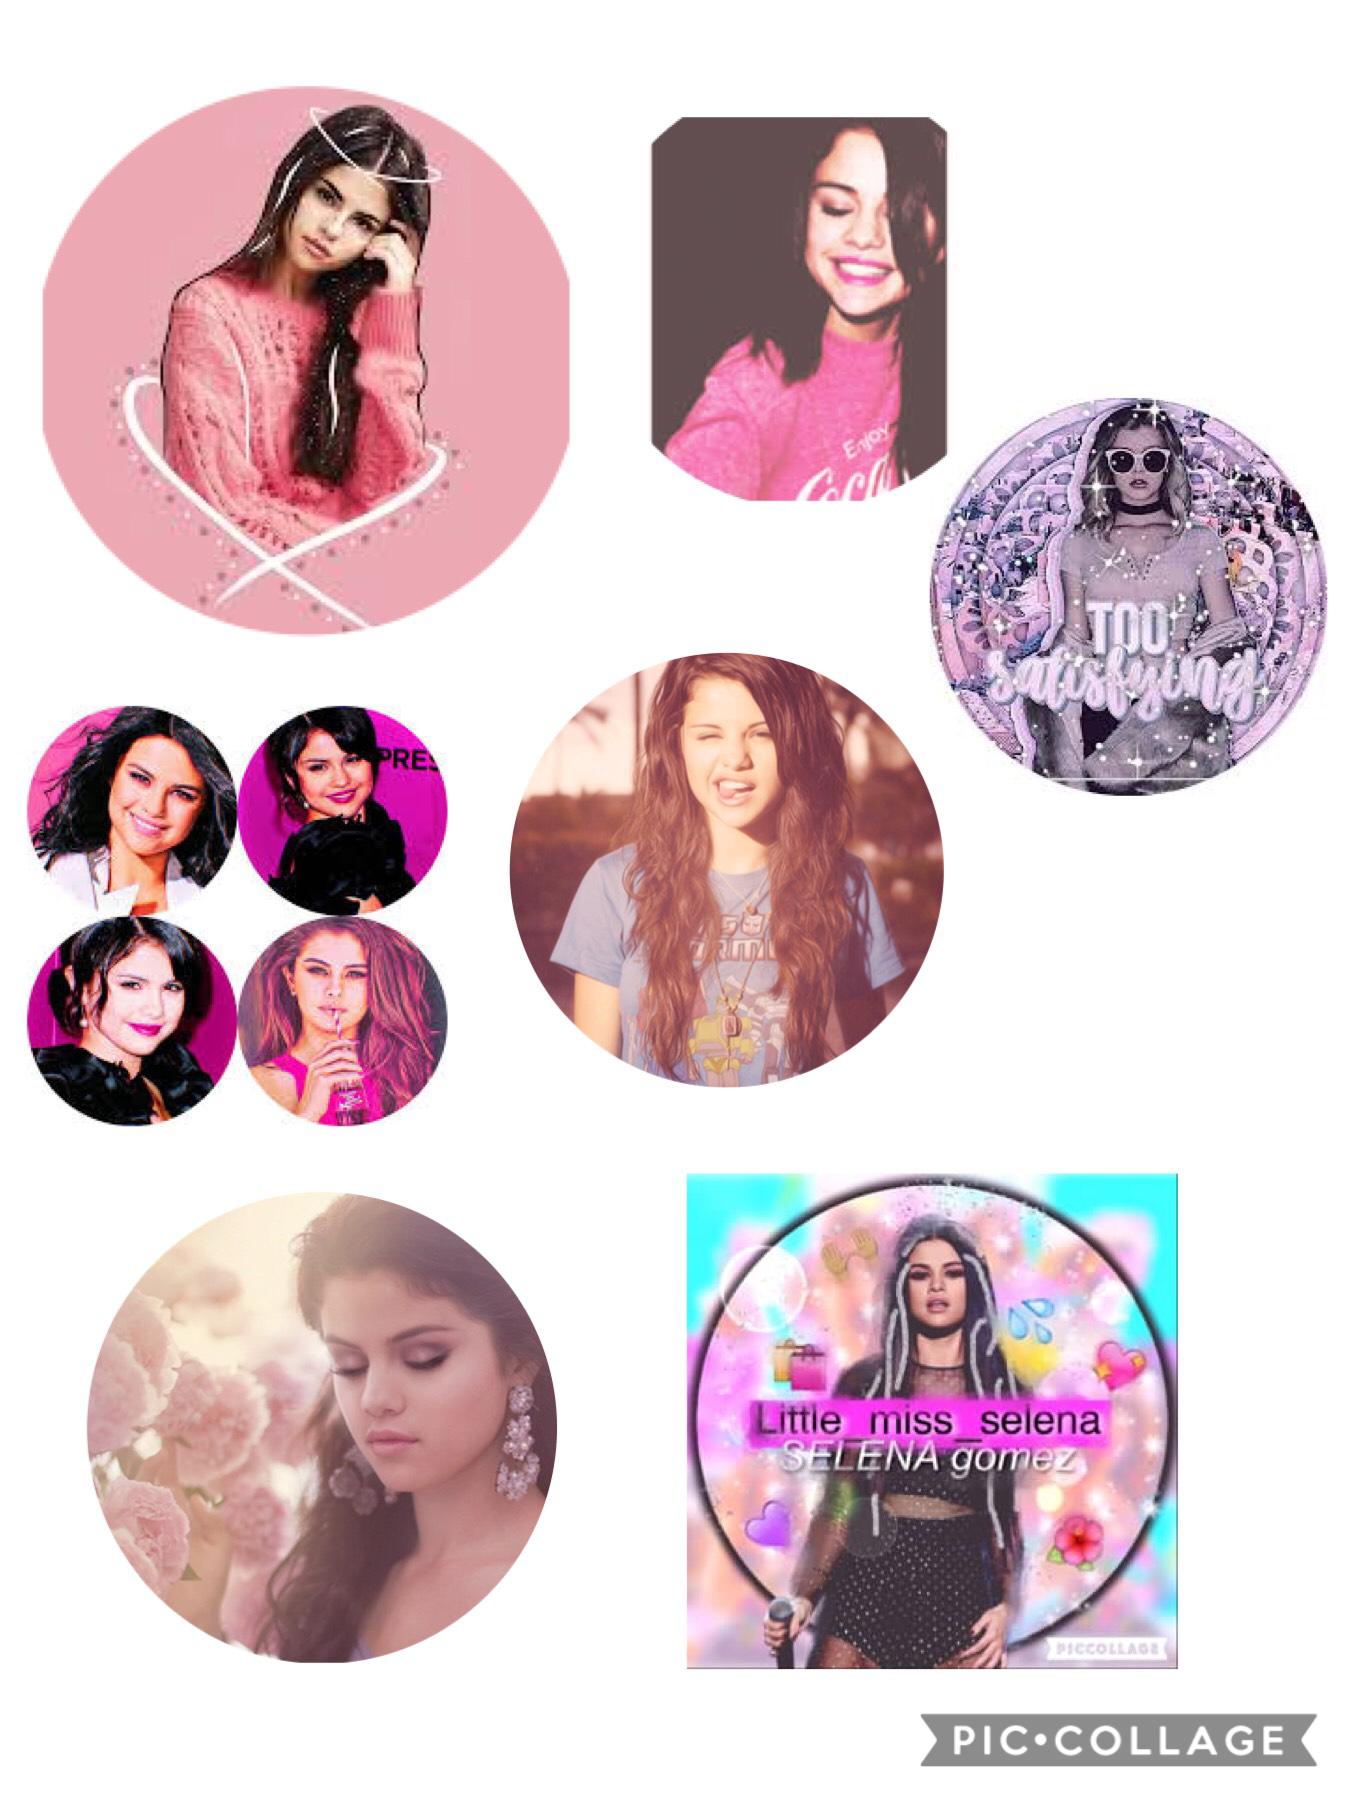 Selena Gomez icons. Make sure to tell shyannjoiner thank you, if you do keep a icon, she got the question right. 